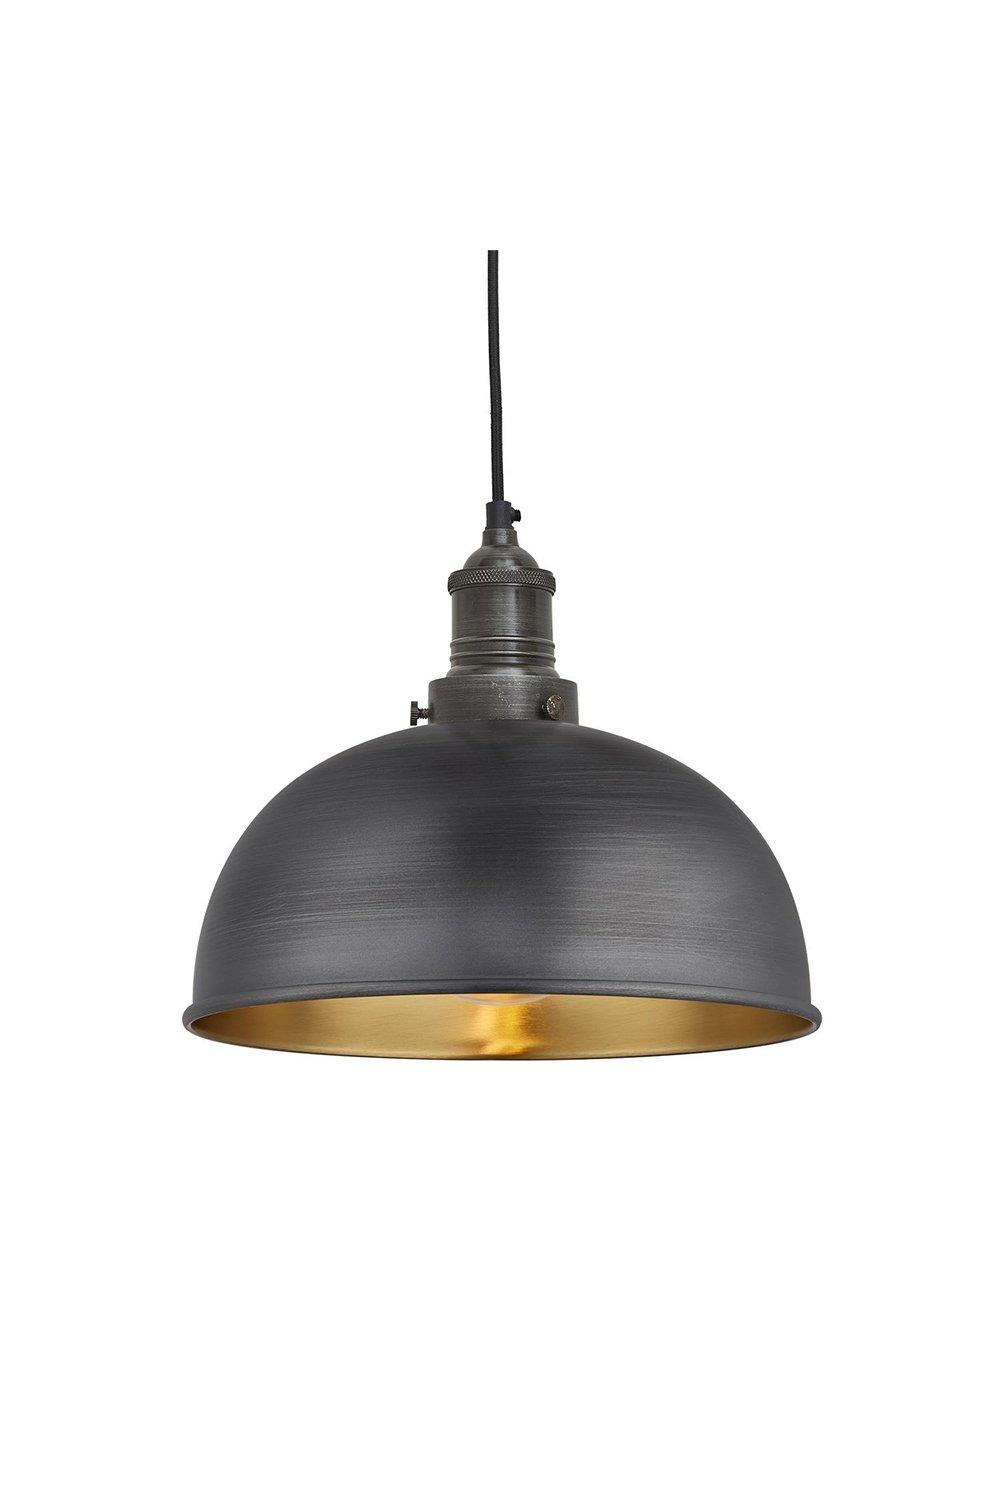 Brooklyn Dome Pendant, 8 Inch, Pewter & Brass, Pewter Holder